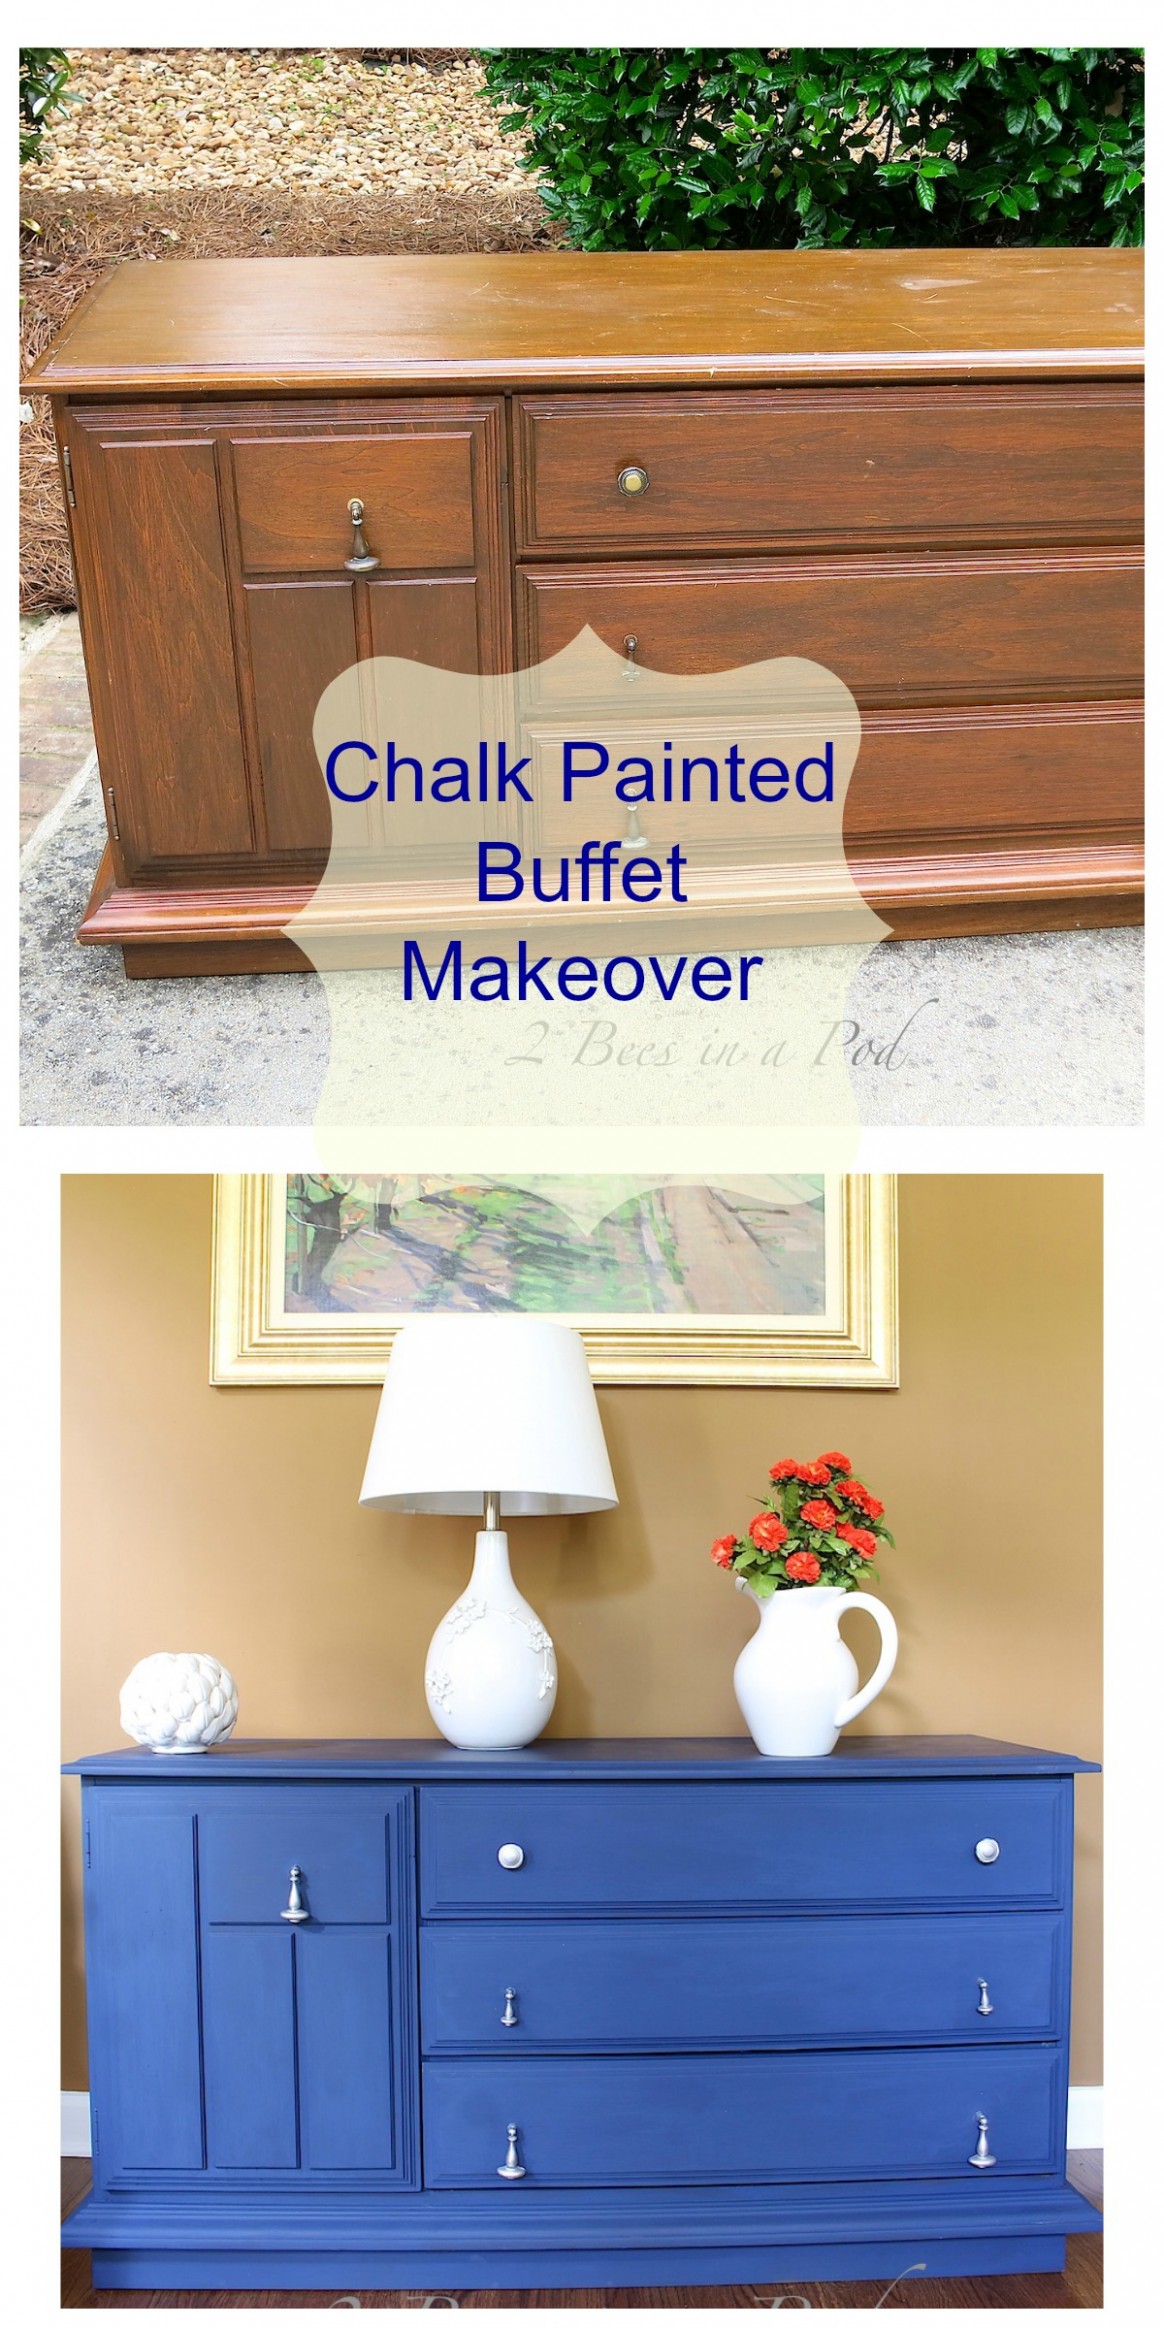 Chalk Painted Buffet Makeover 9 Bees In A Pod Pictures Of Annie Sloan Chalk Painted Furniture